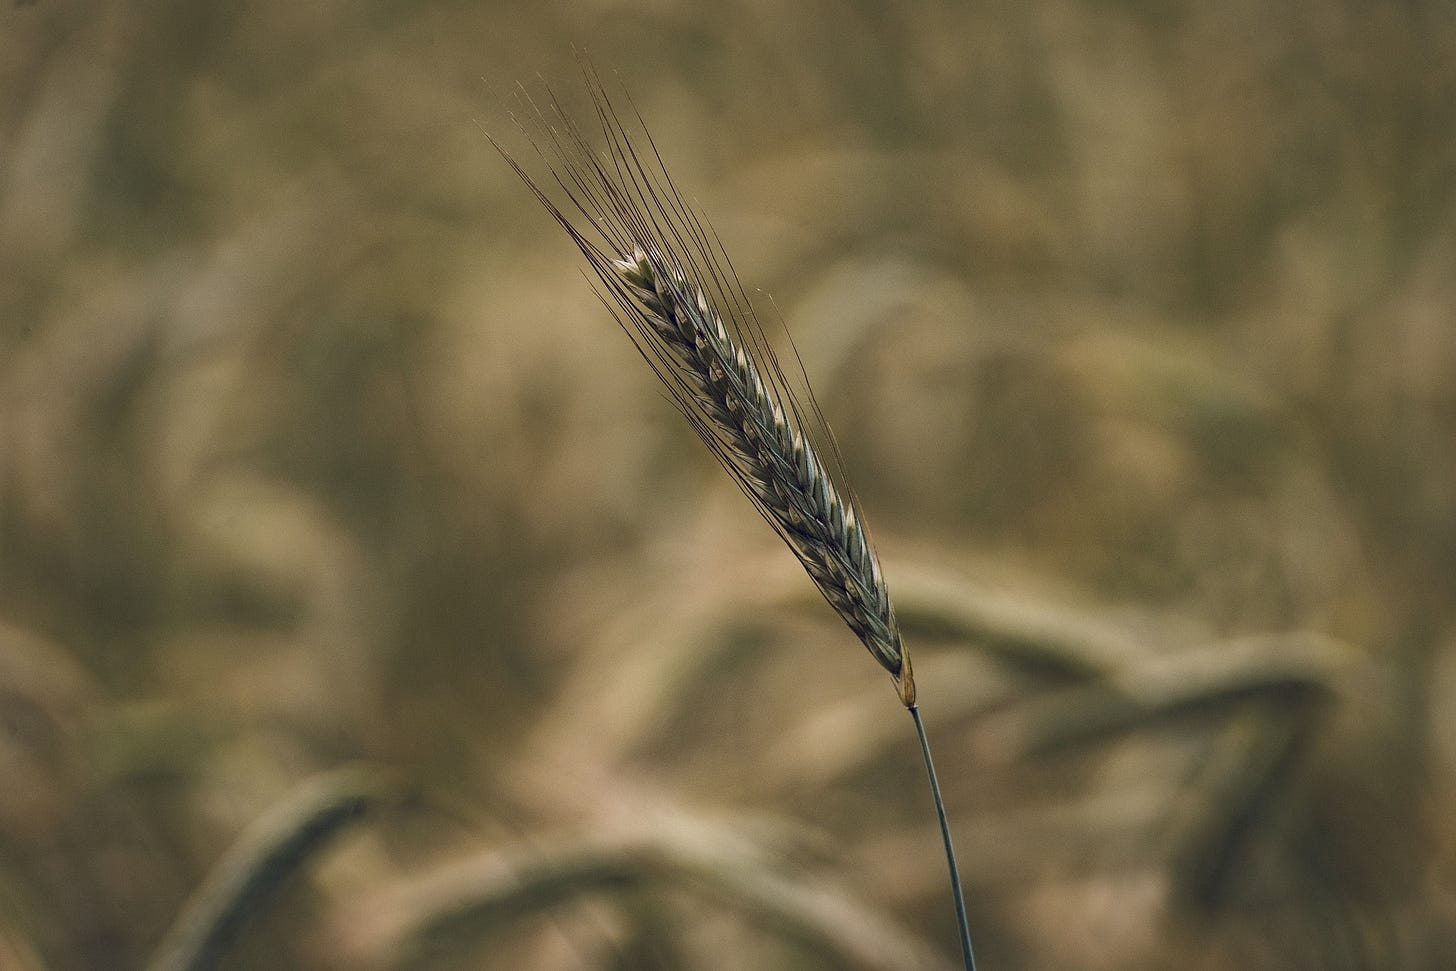 A stalk of wheat